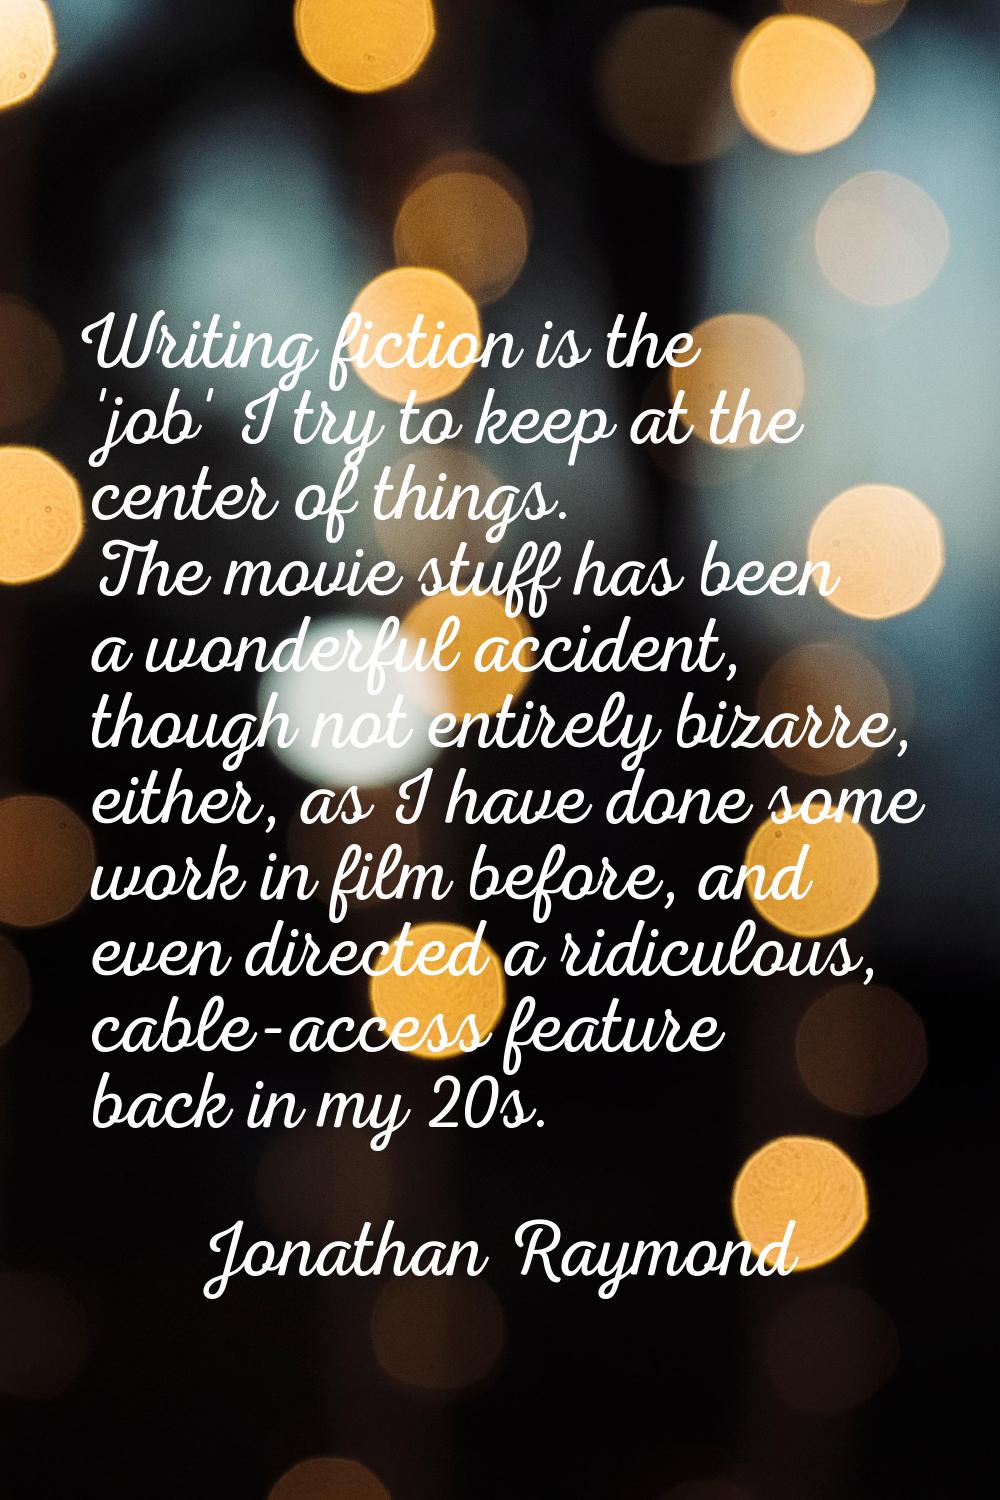 Writing fiction is the 'job' I try to keep at the center of things. The movie stuff has been a wond